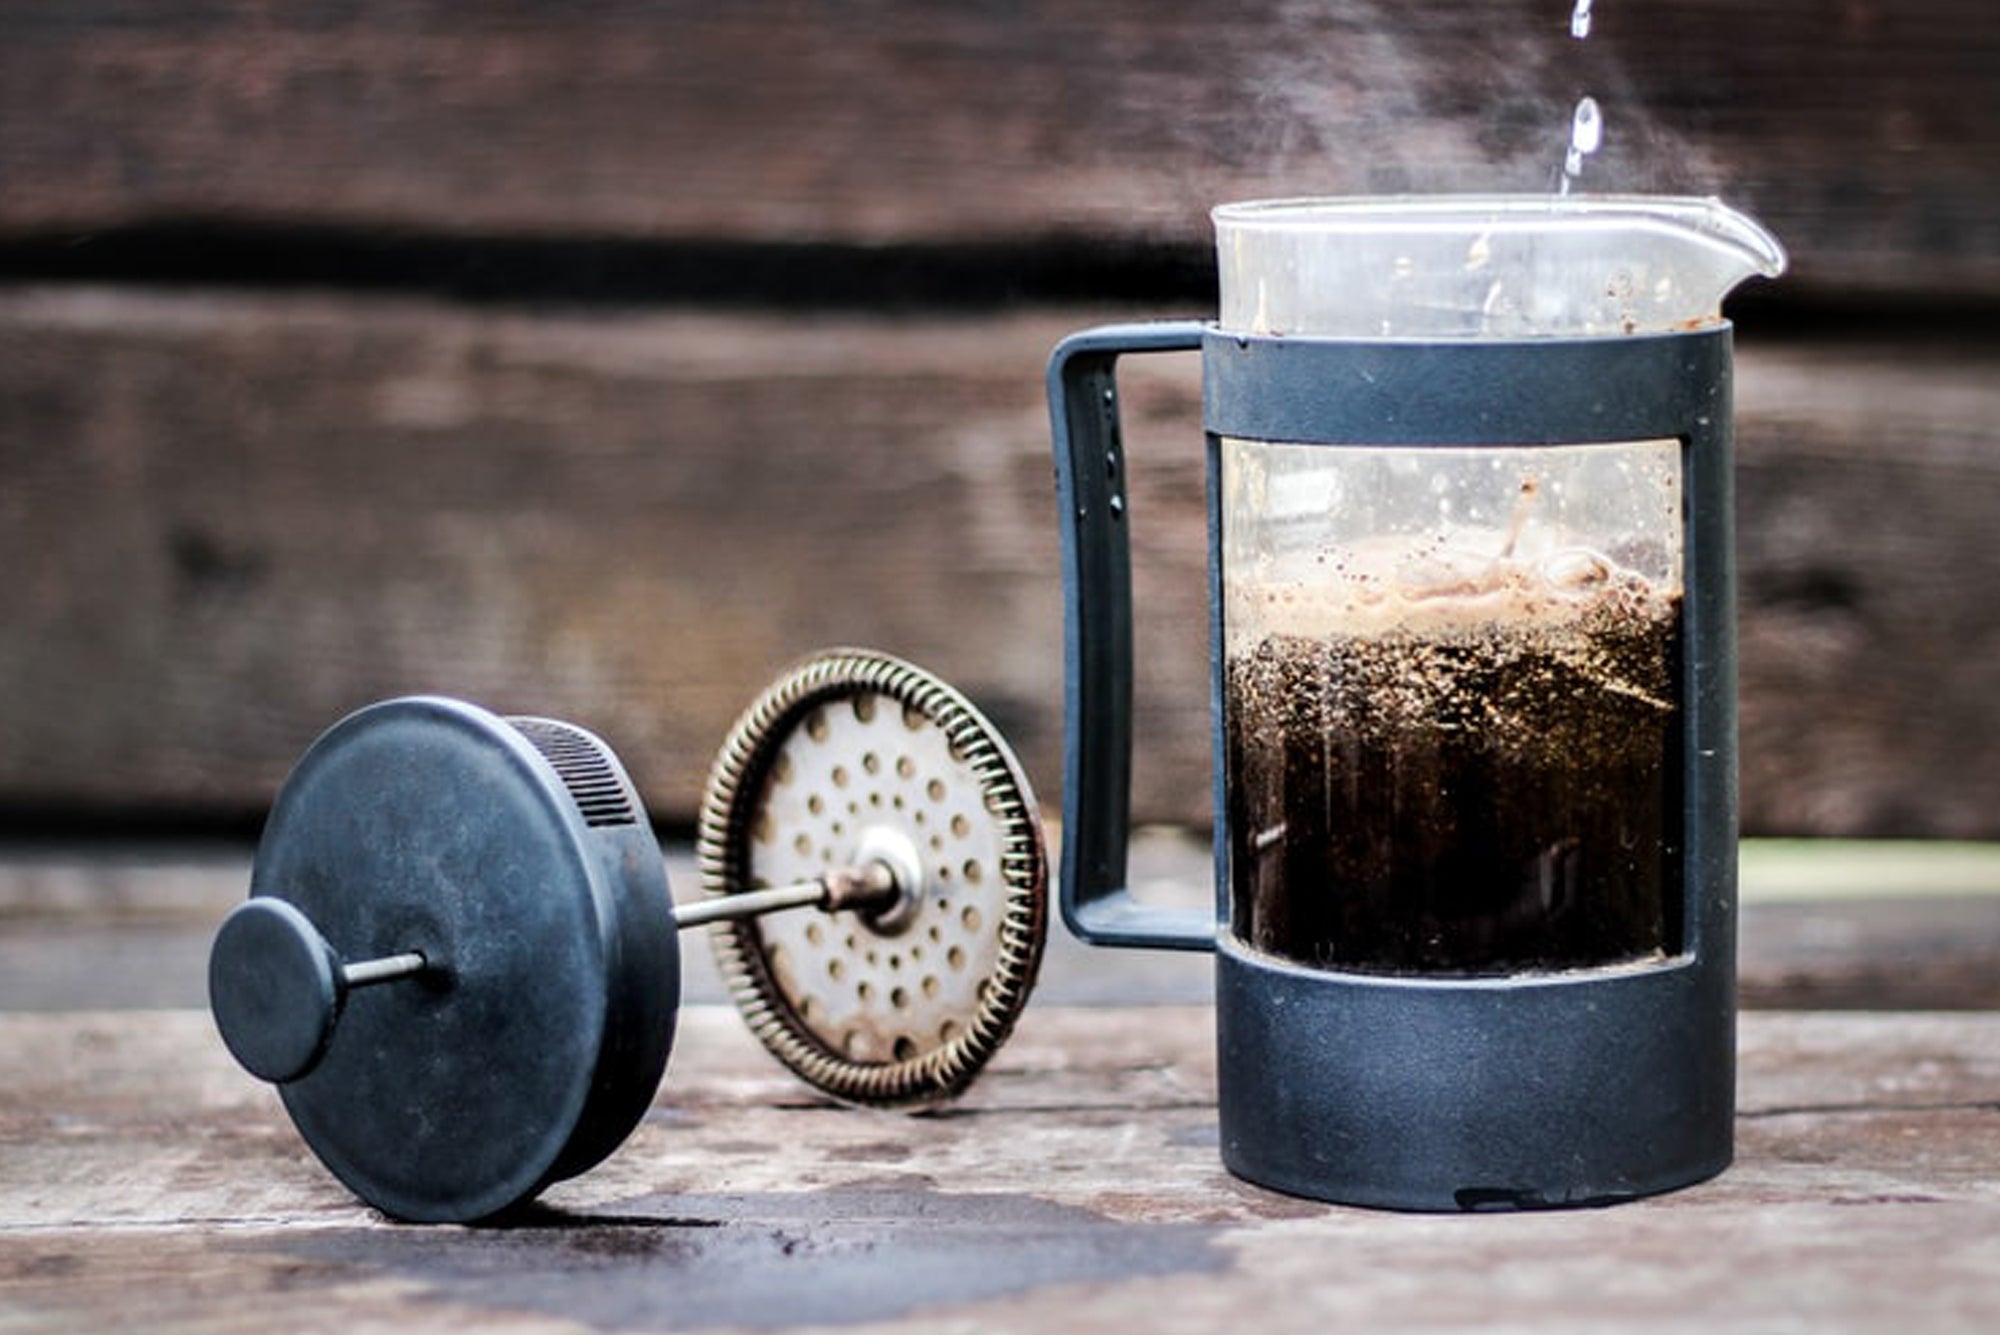 Use Your French Press Best With a Coffee Calculator